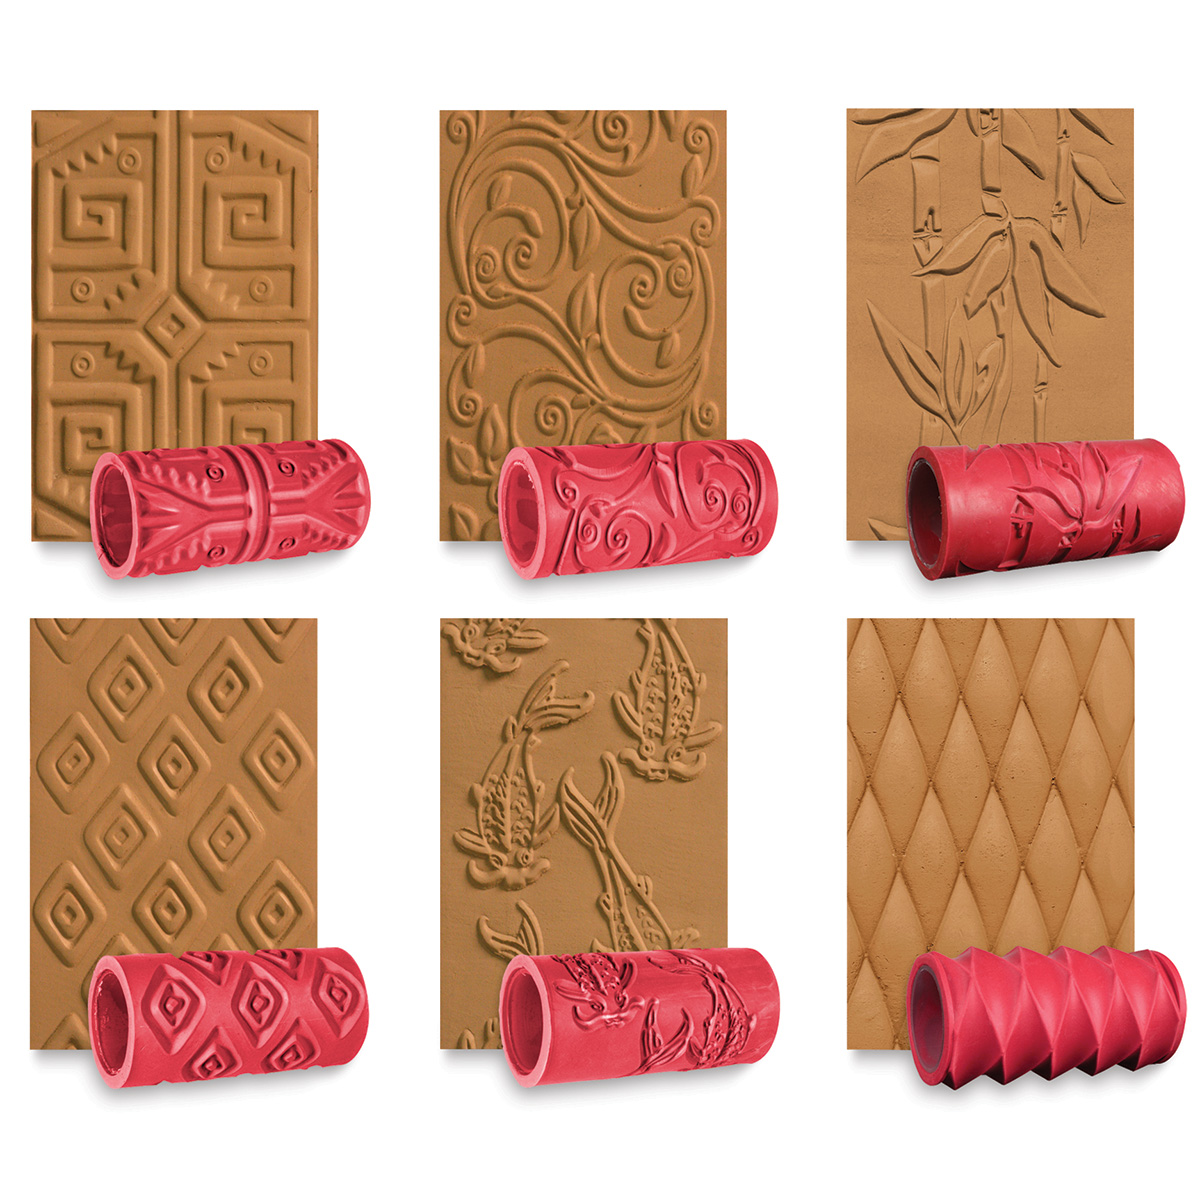 Clay Texture Rollers - How to Make and Use Texture Rollers